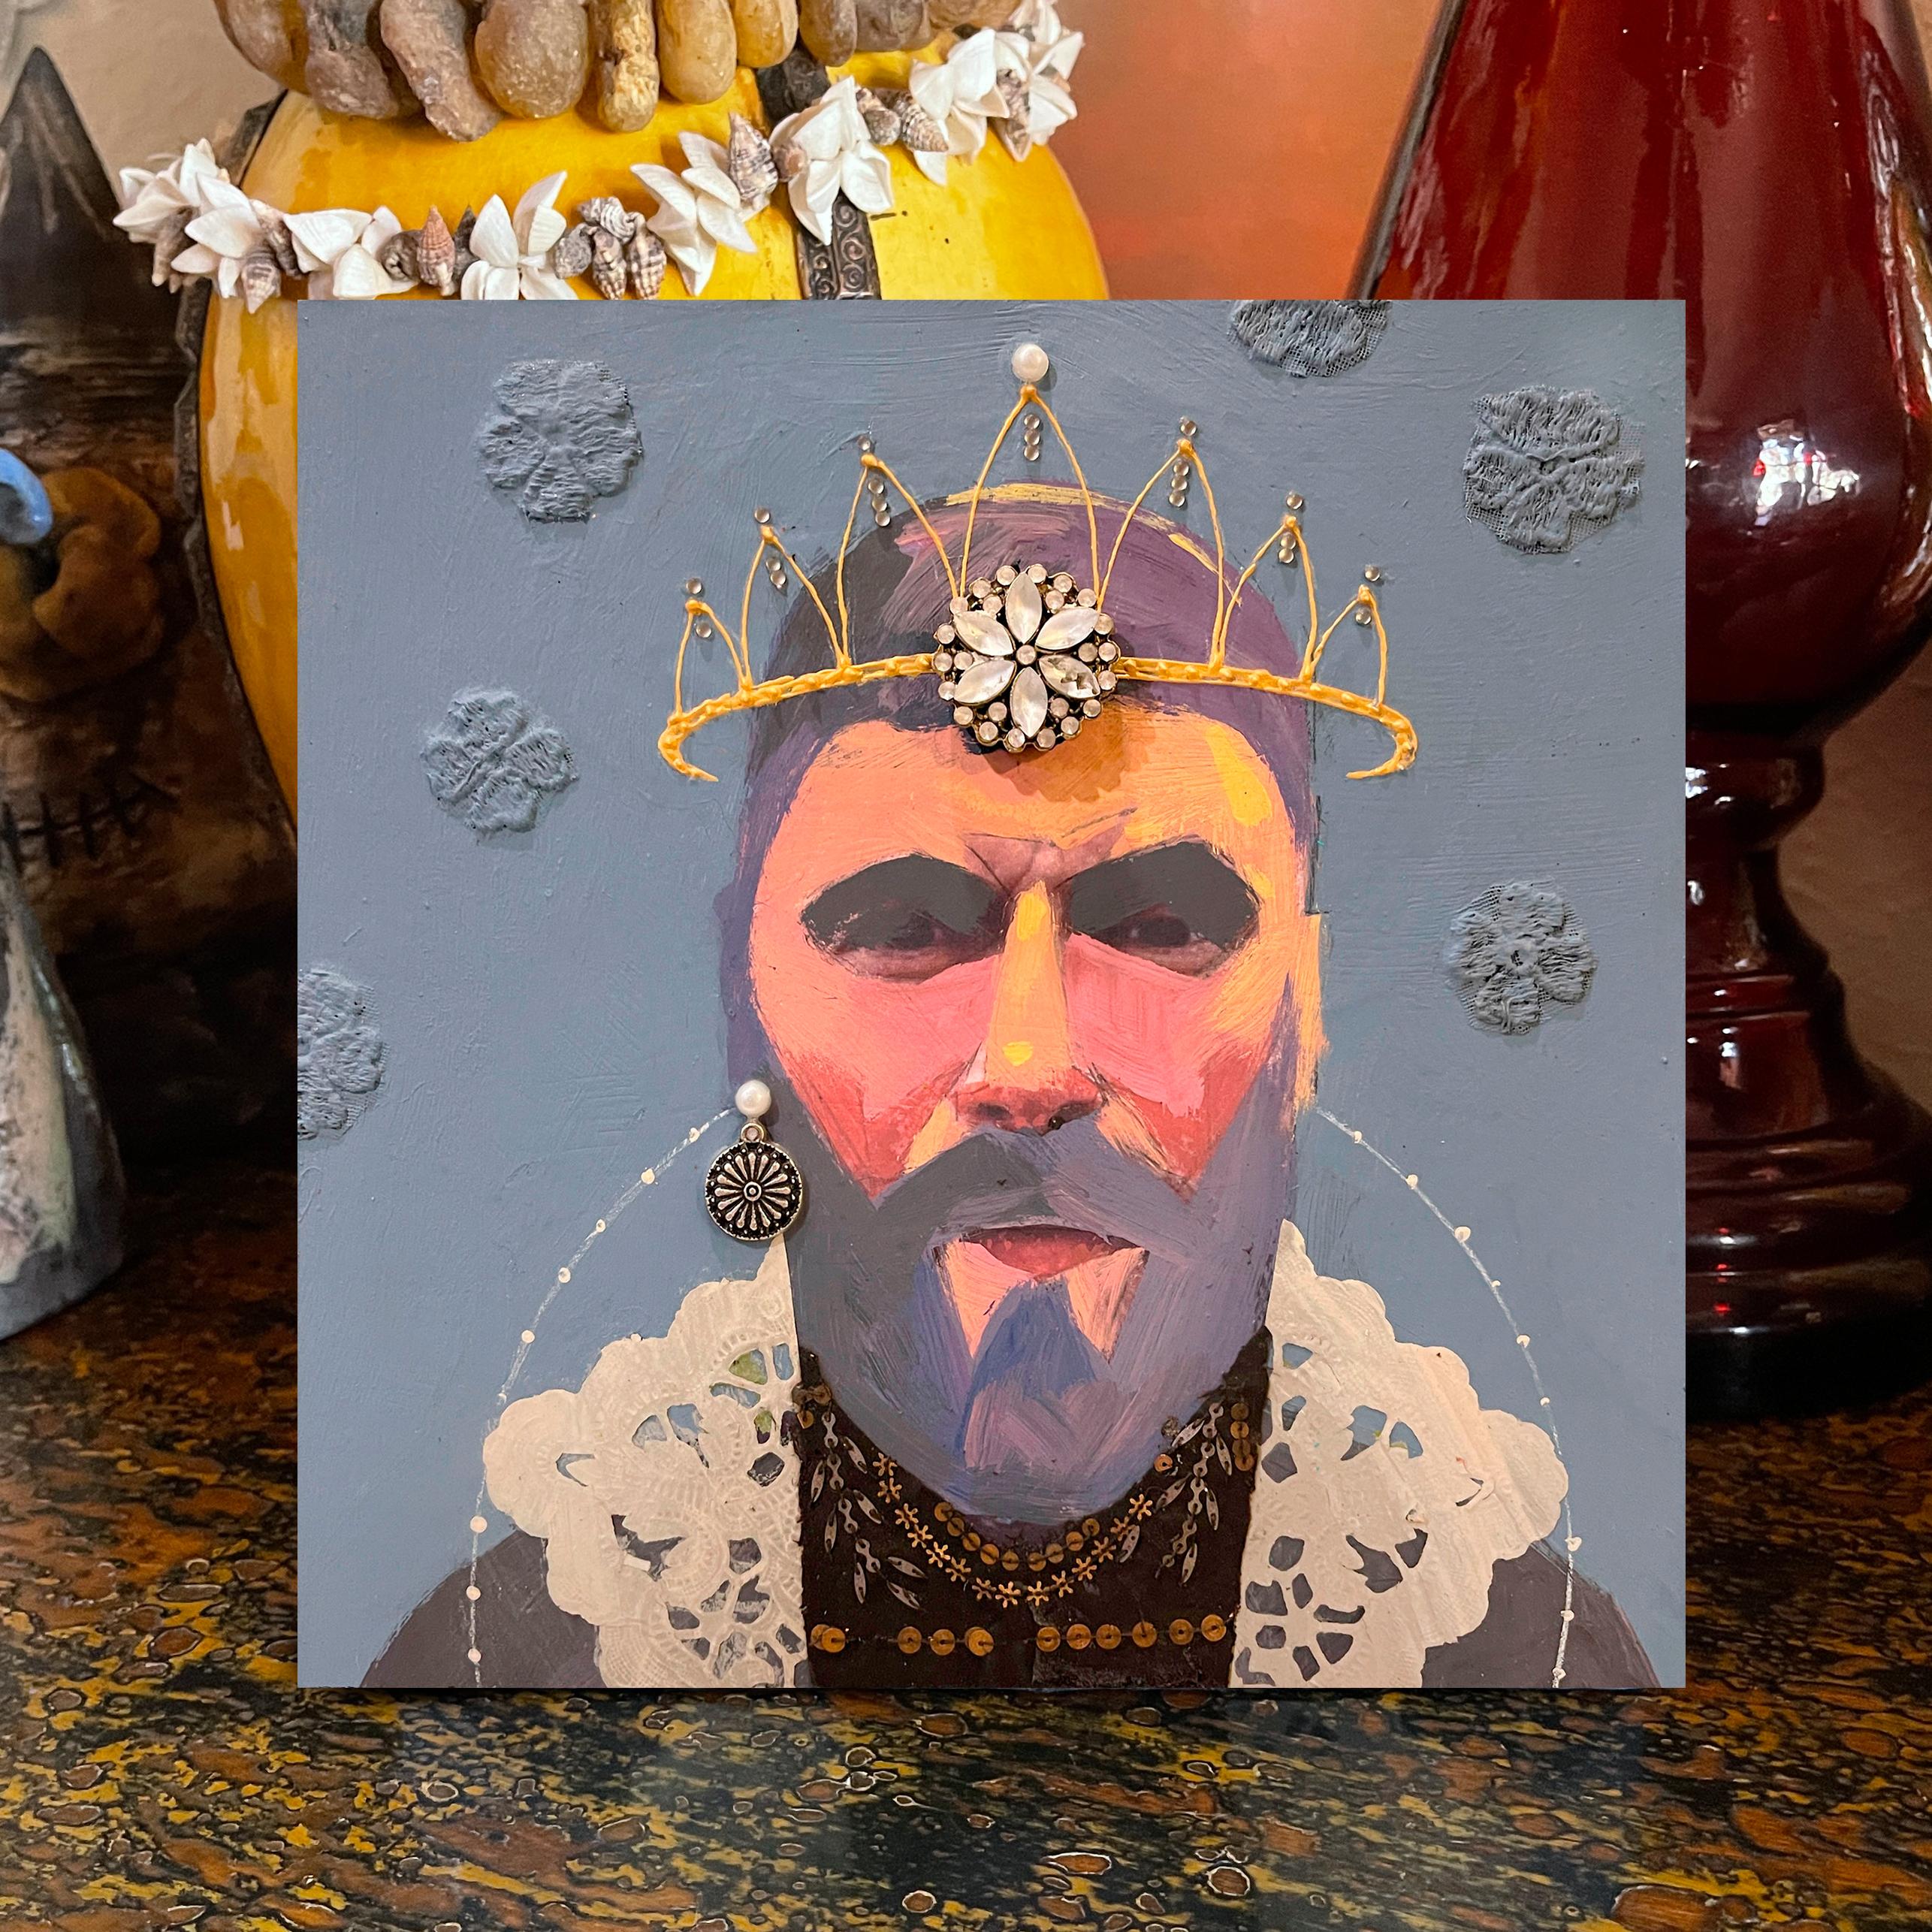 <p>Artist Comments<br>Artist Darlene McElroy creates a portrait depicted as royalty with recurring accents of flowers in his accessories and in the background. 